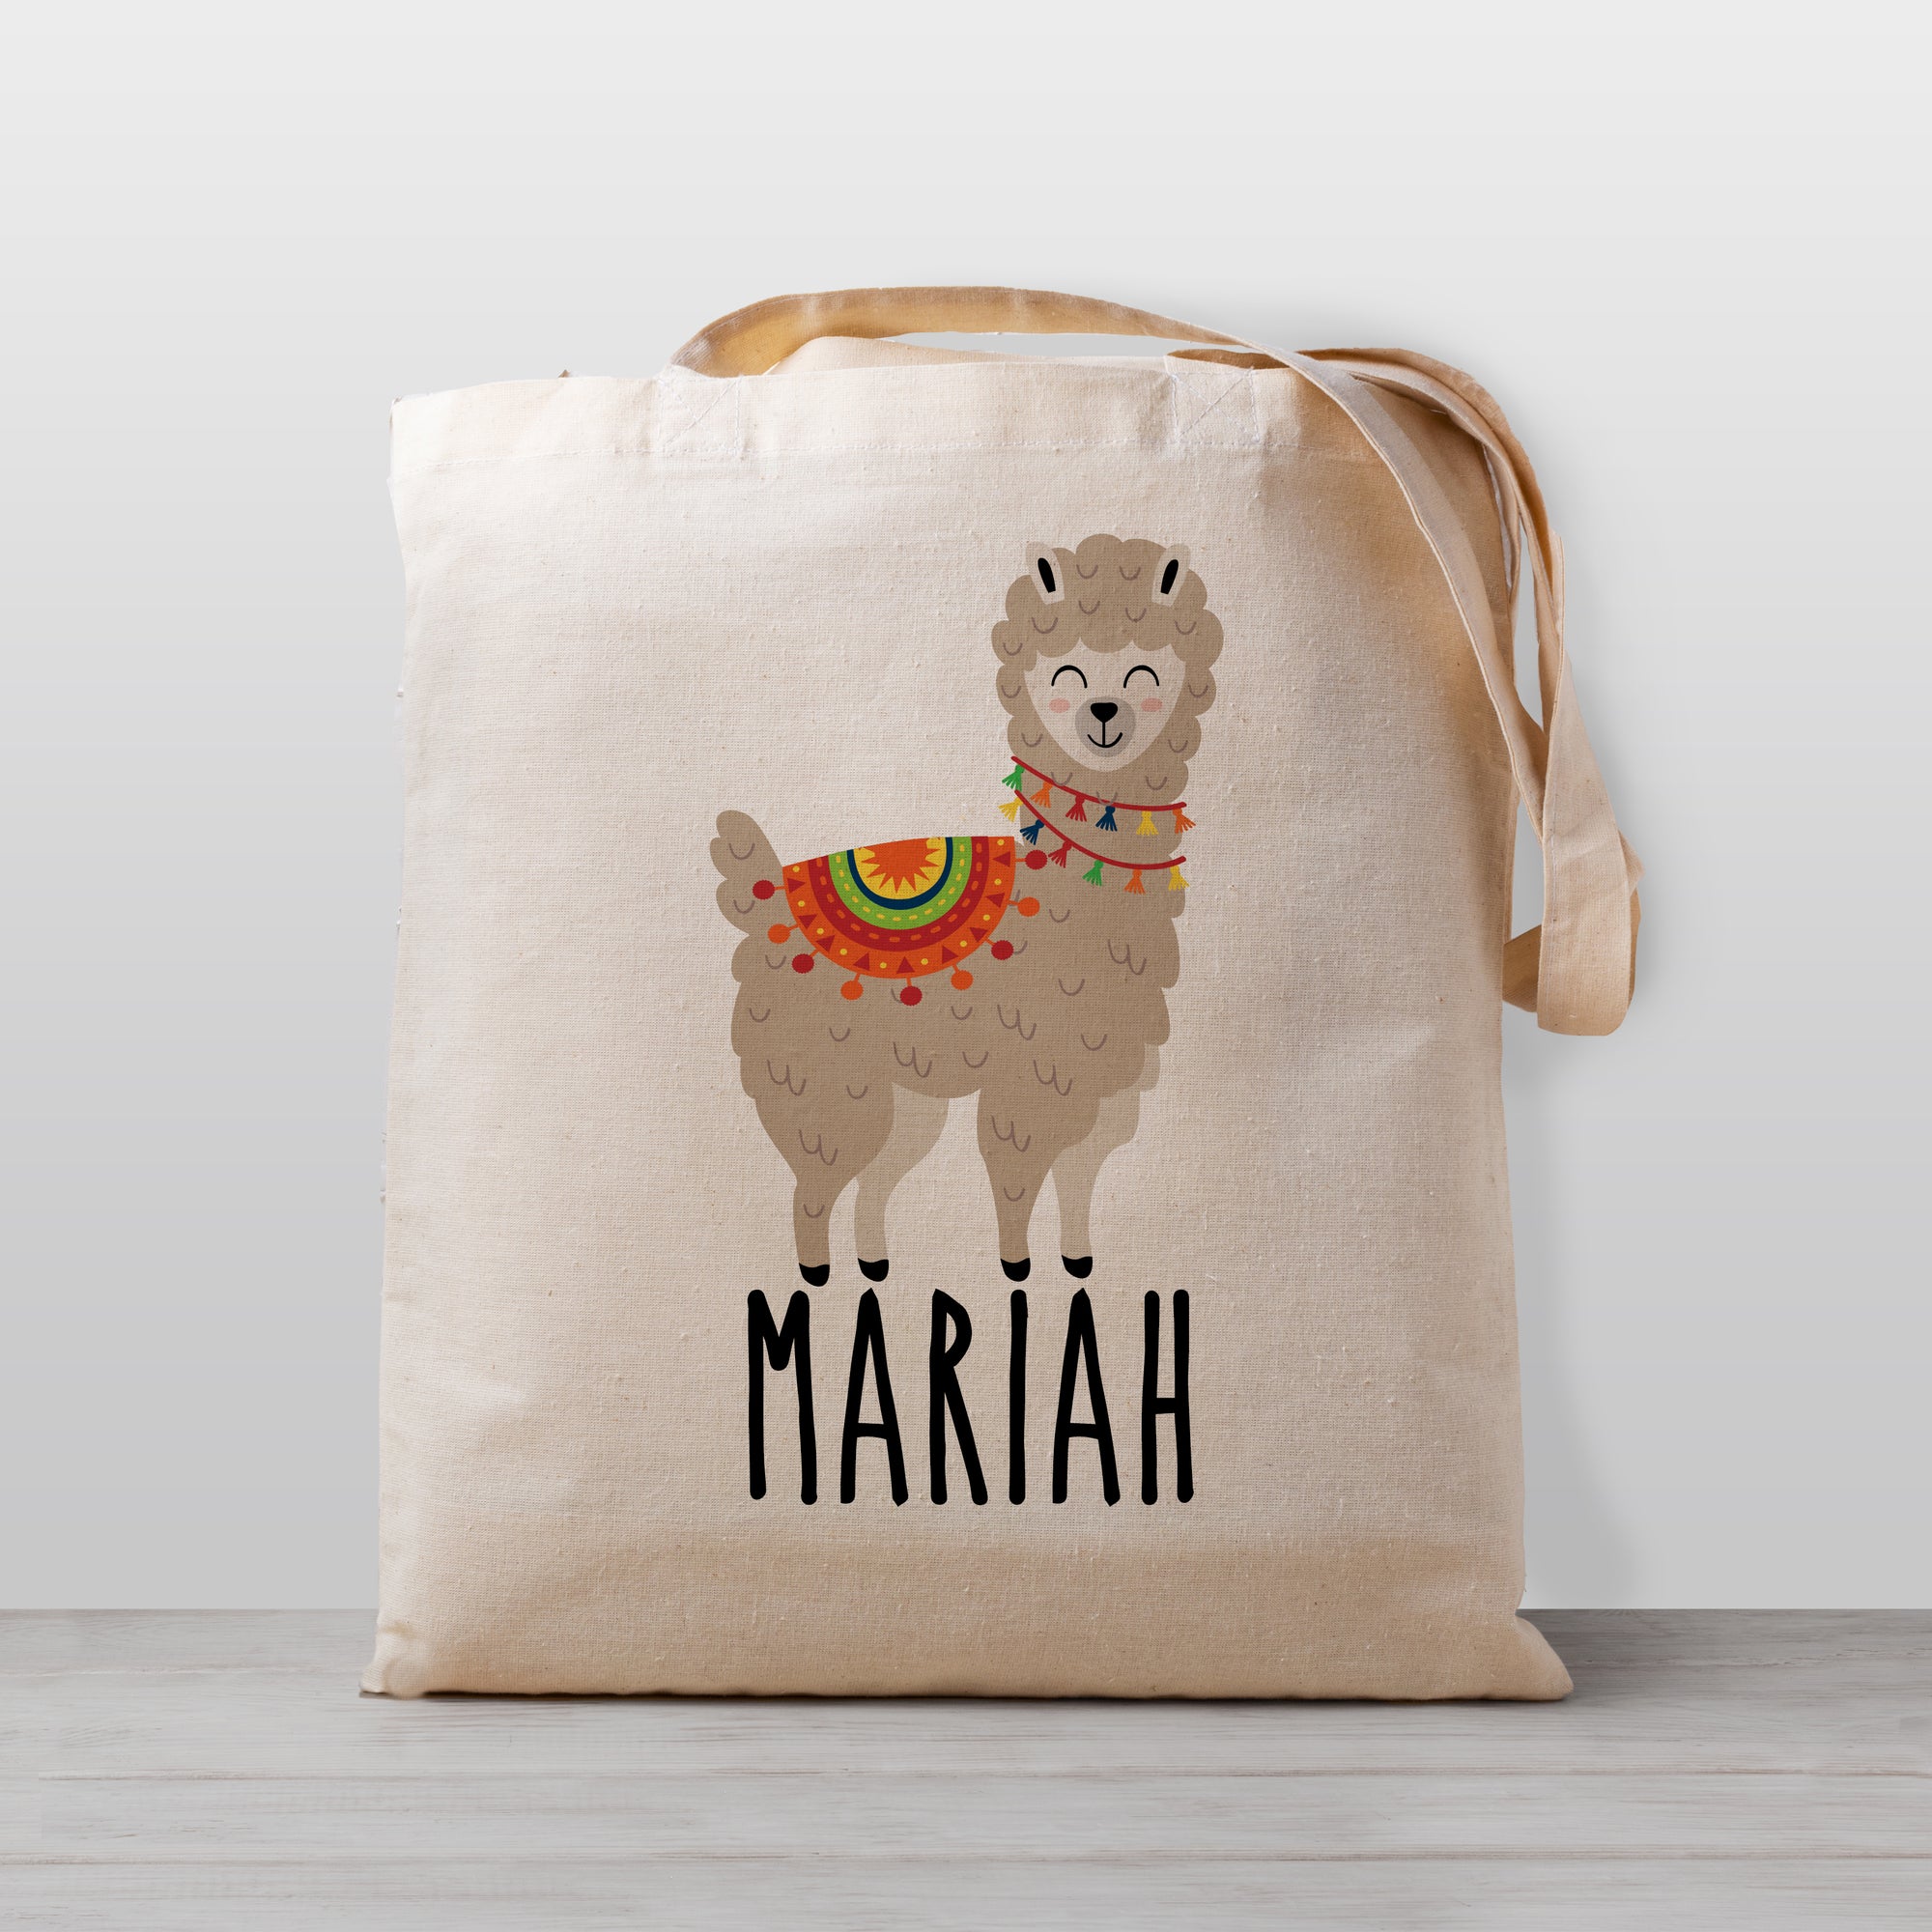 Llama Personalized Kid's Tote Bag, Gender neutral perfect or oboys or girls, 100% natural cotton canvas